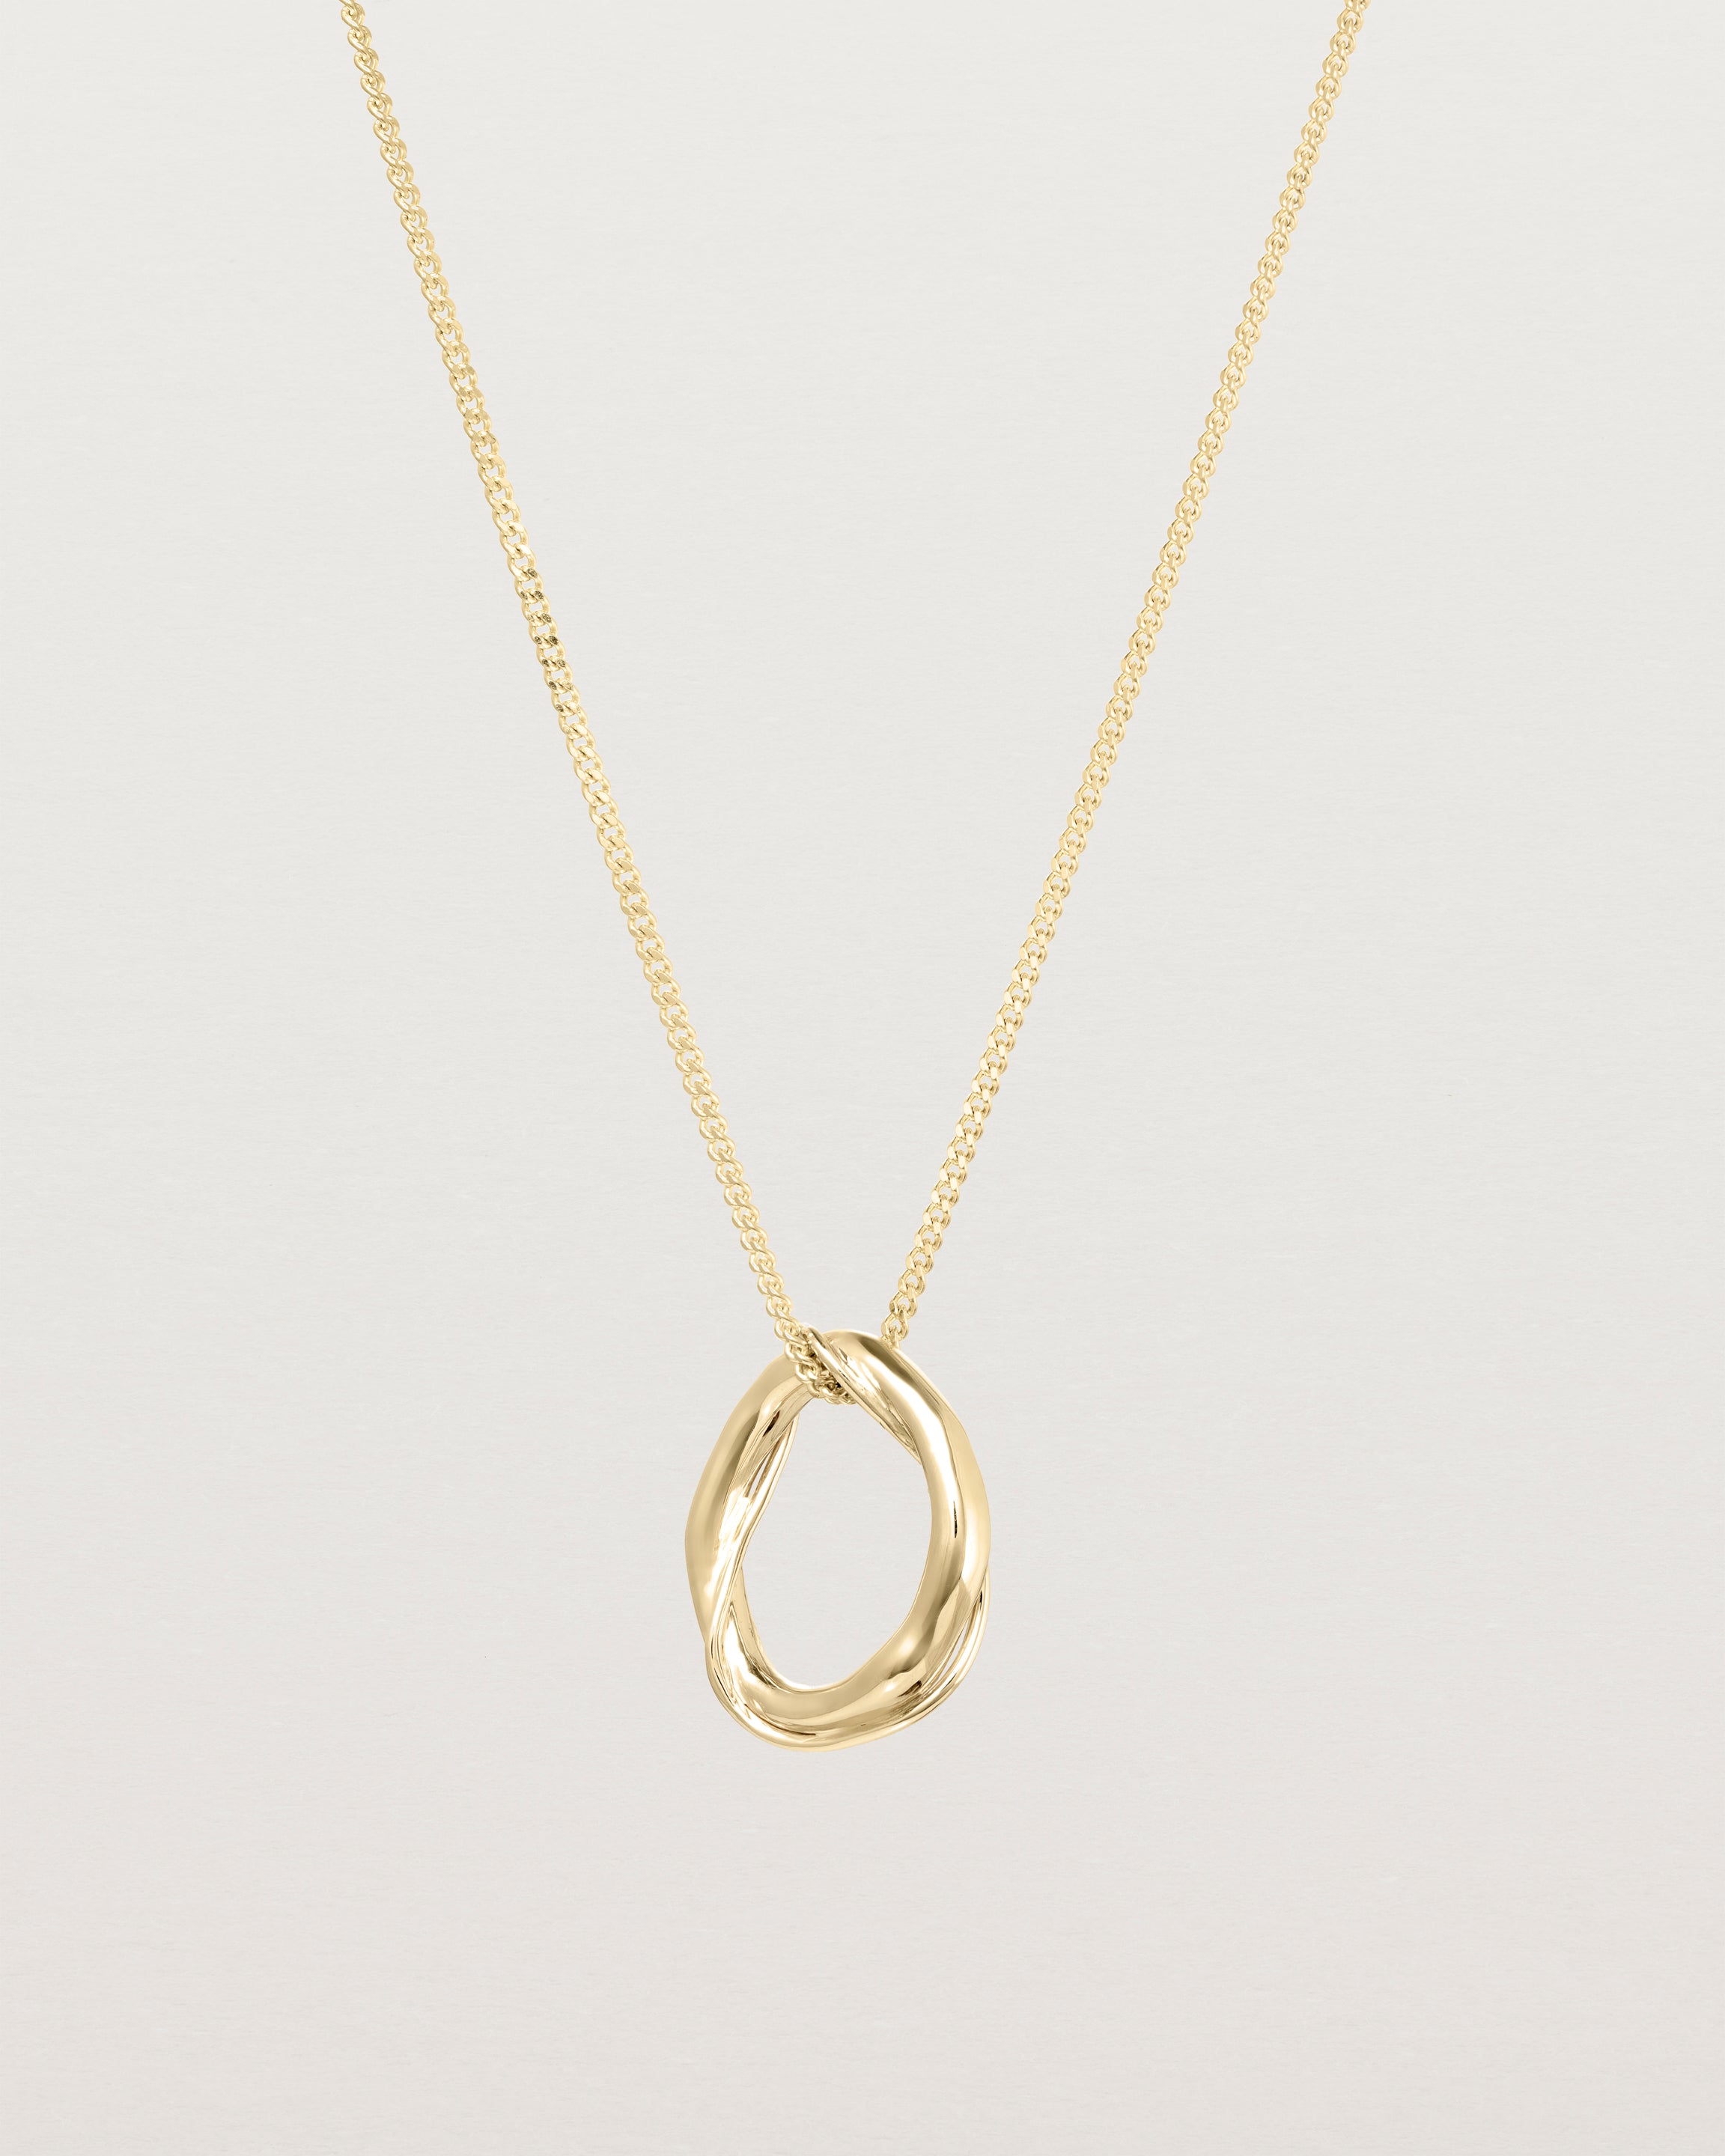 Front view of the Petite Dalí Necklace in yellow gold.